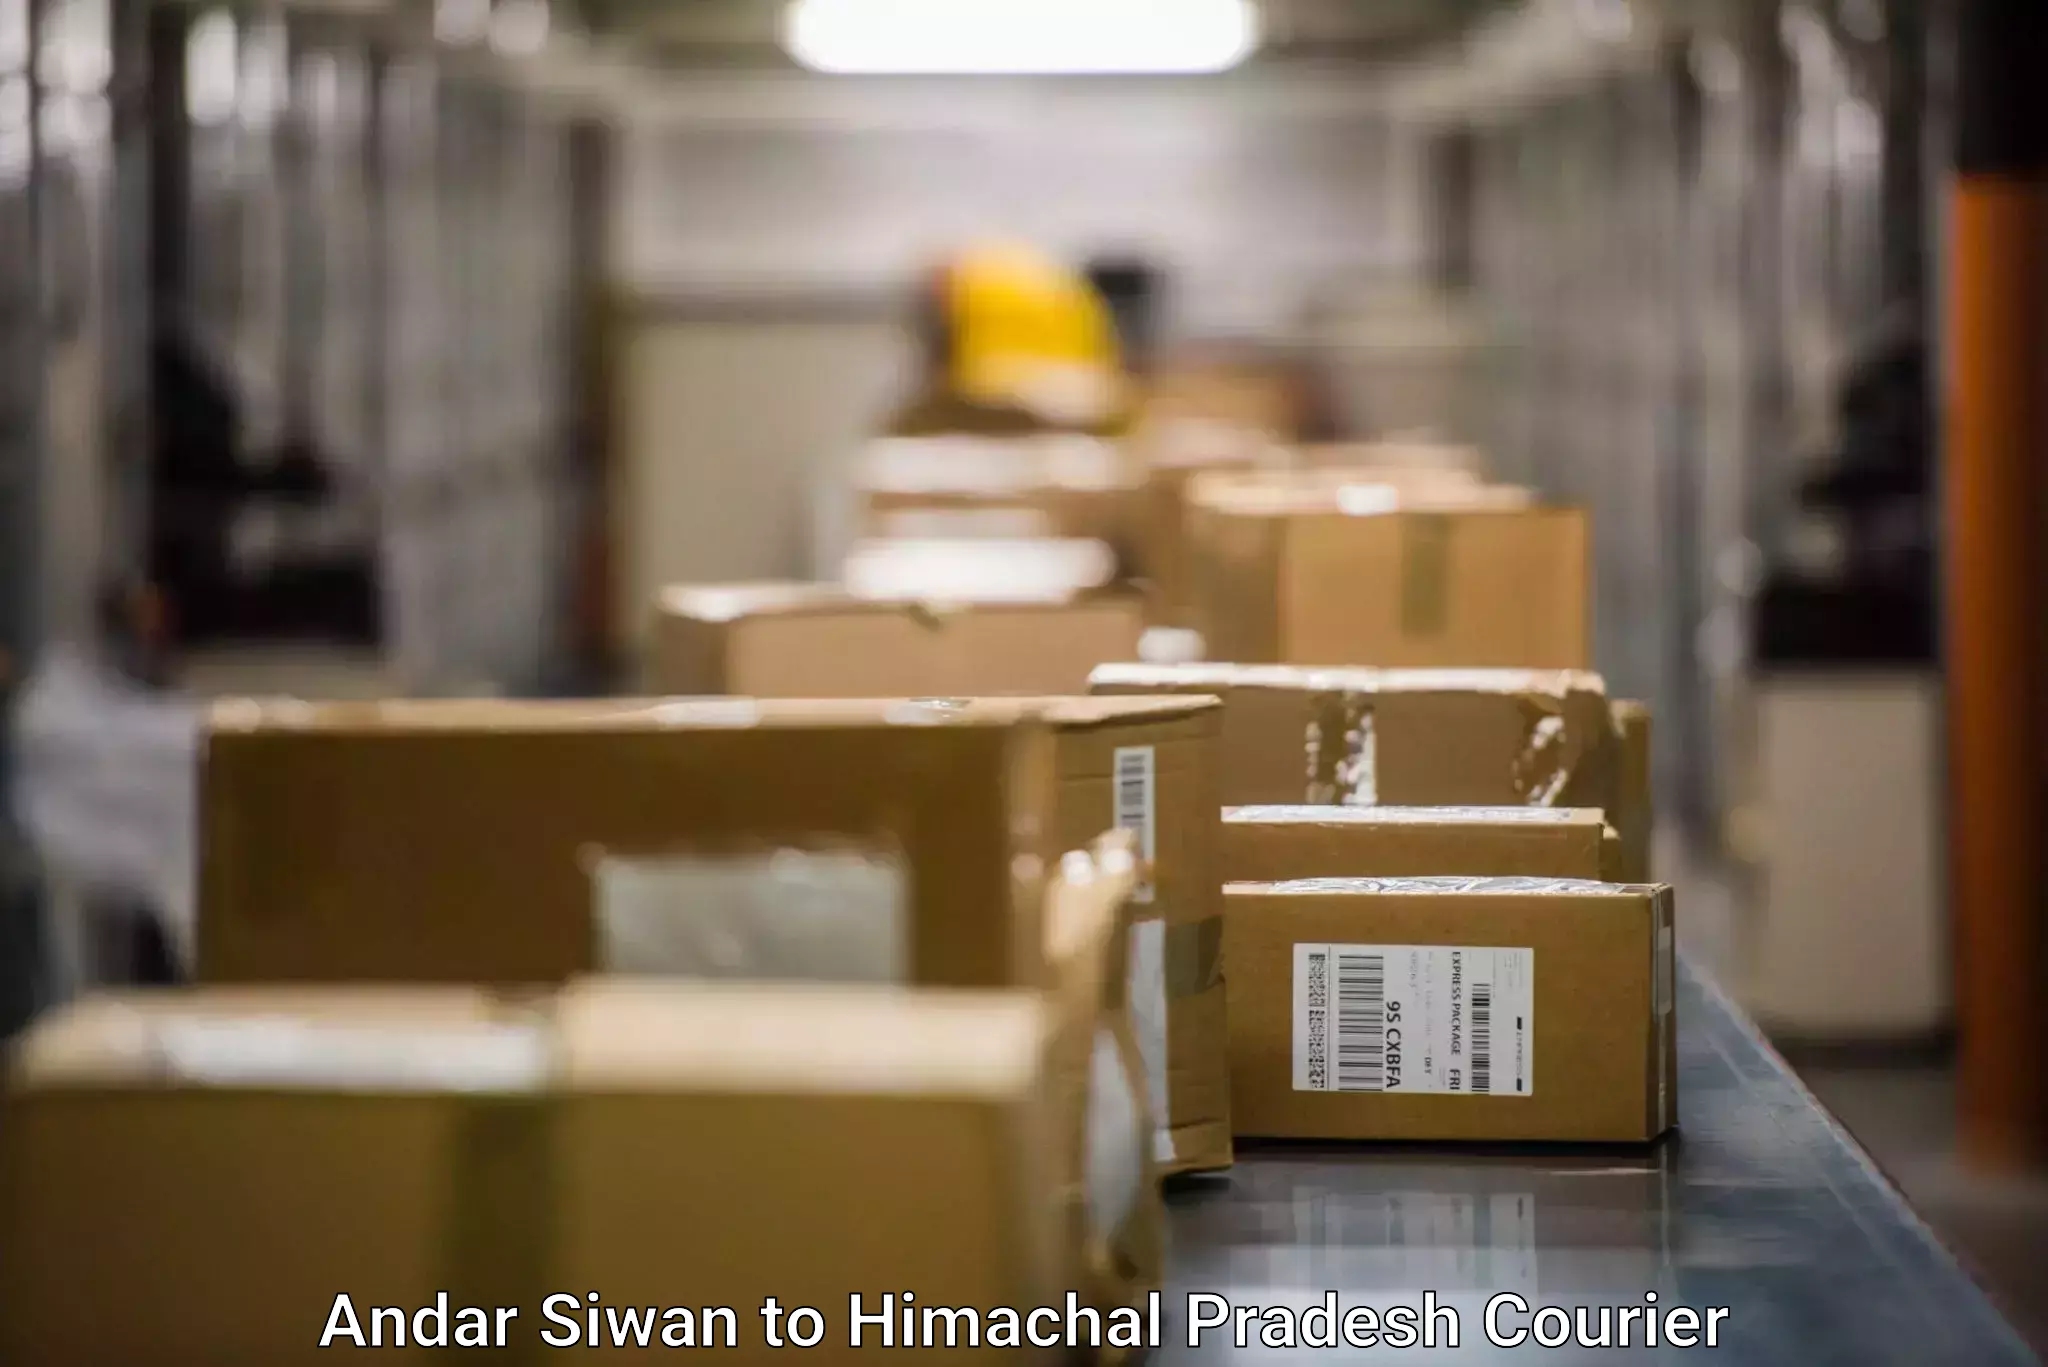 State-of-the-art courier technology Andar Siwan to Himachal Pradesh